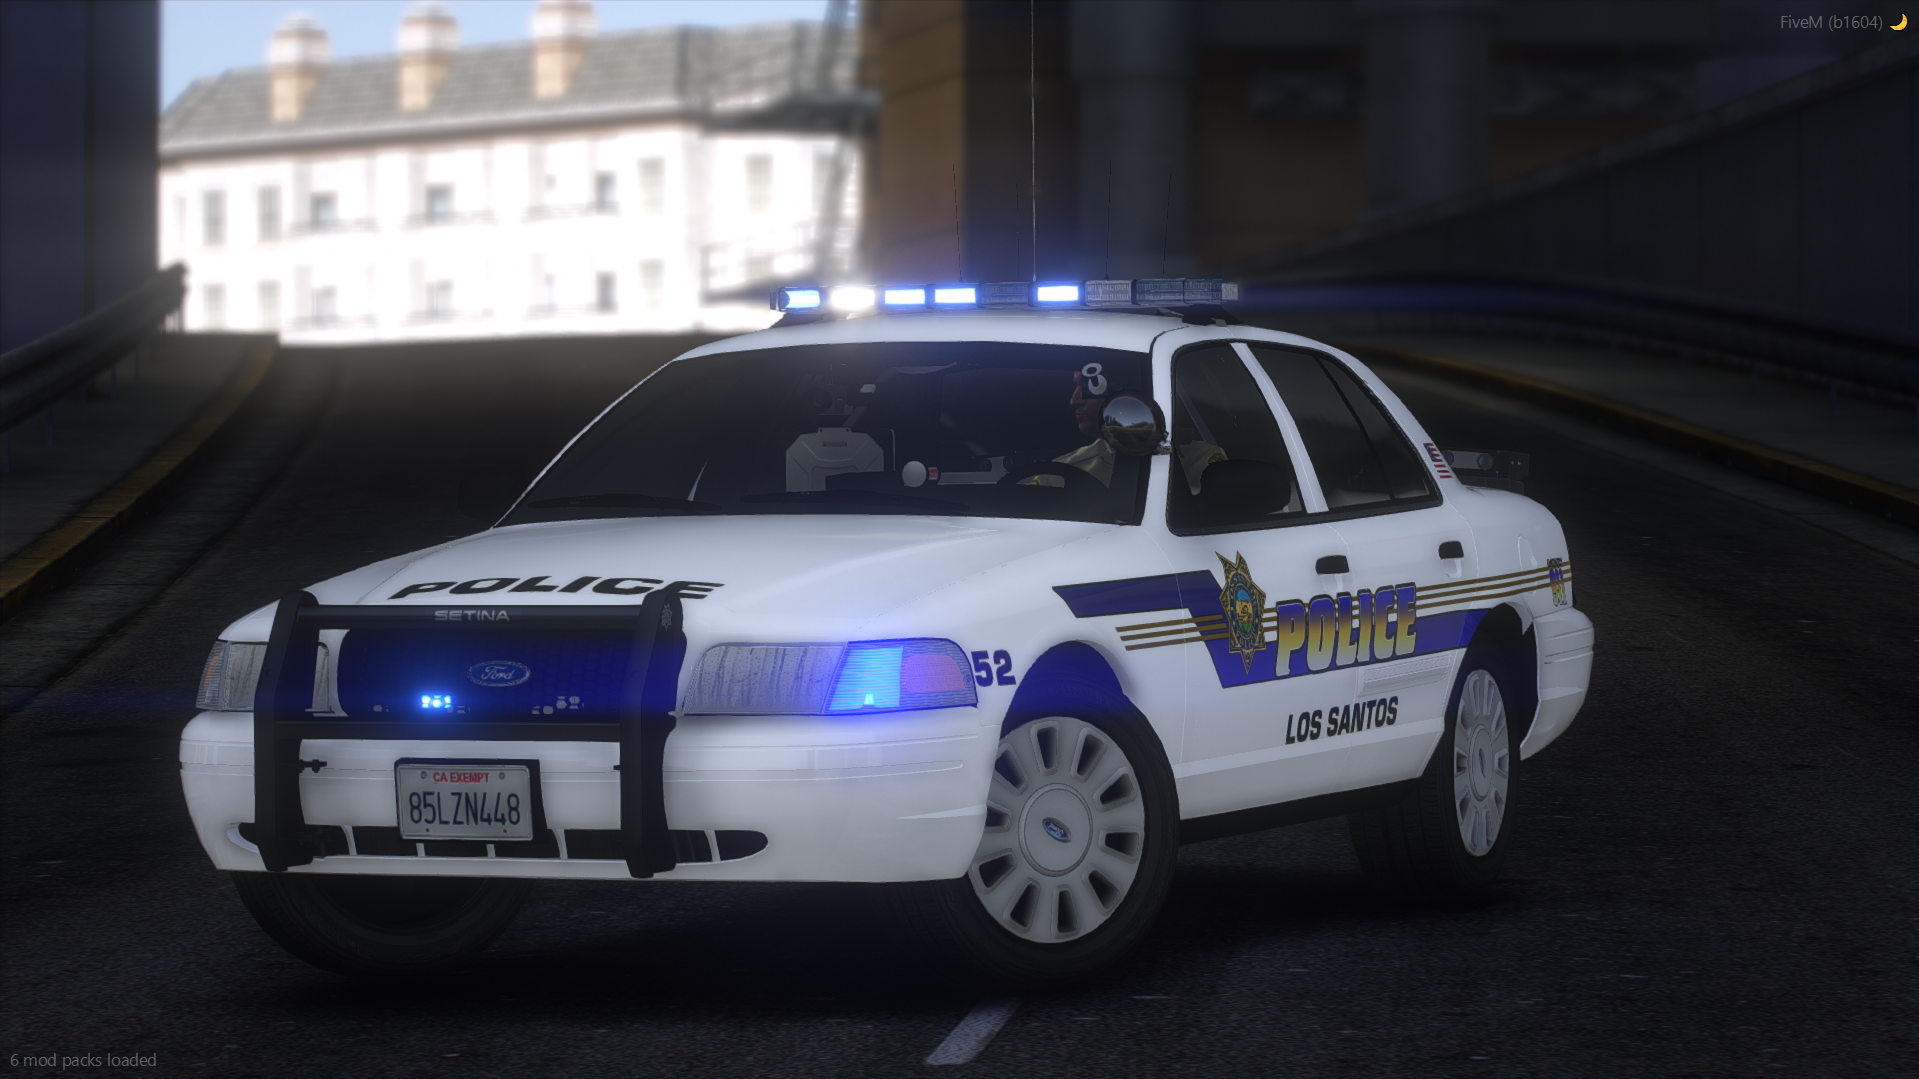 A Crown Victoria police car with a Whelen Patriot lightbar, featuring NON-ELS technology